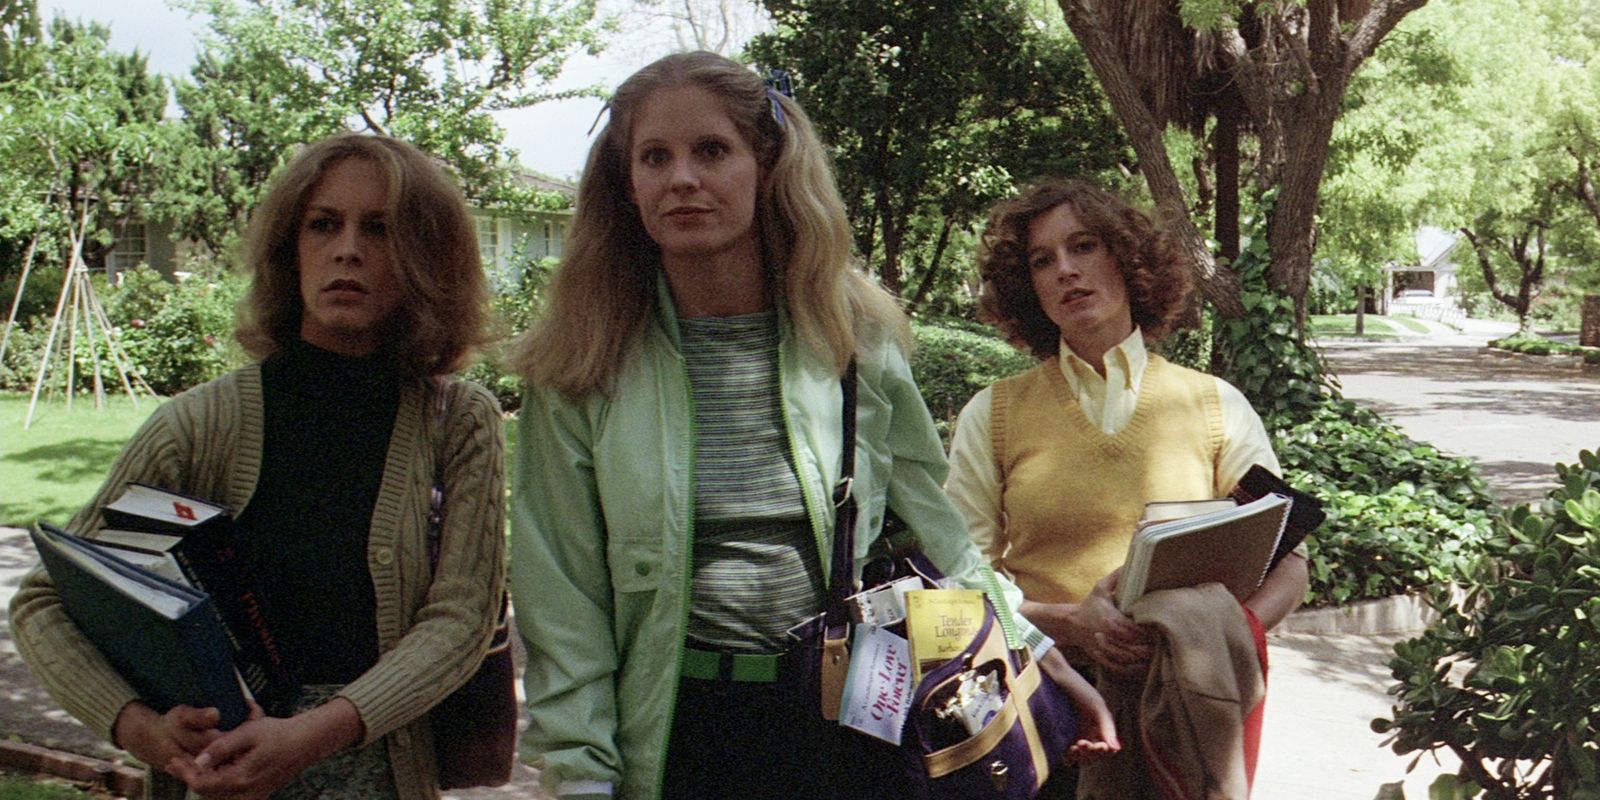 Laurie, Lynda and Annie in Halloween